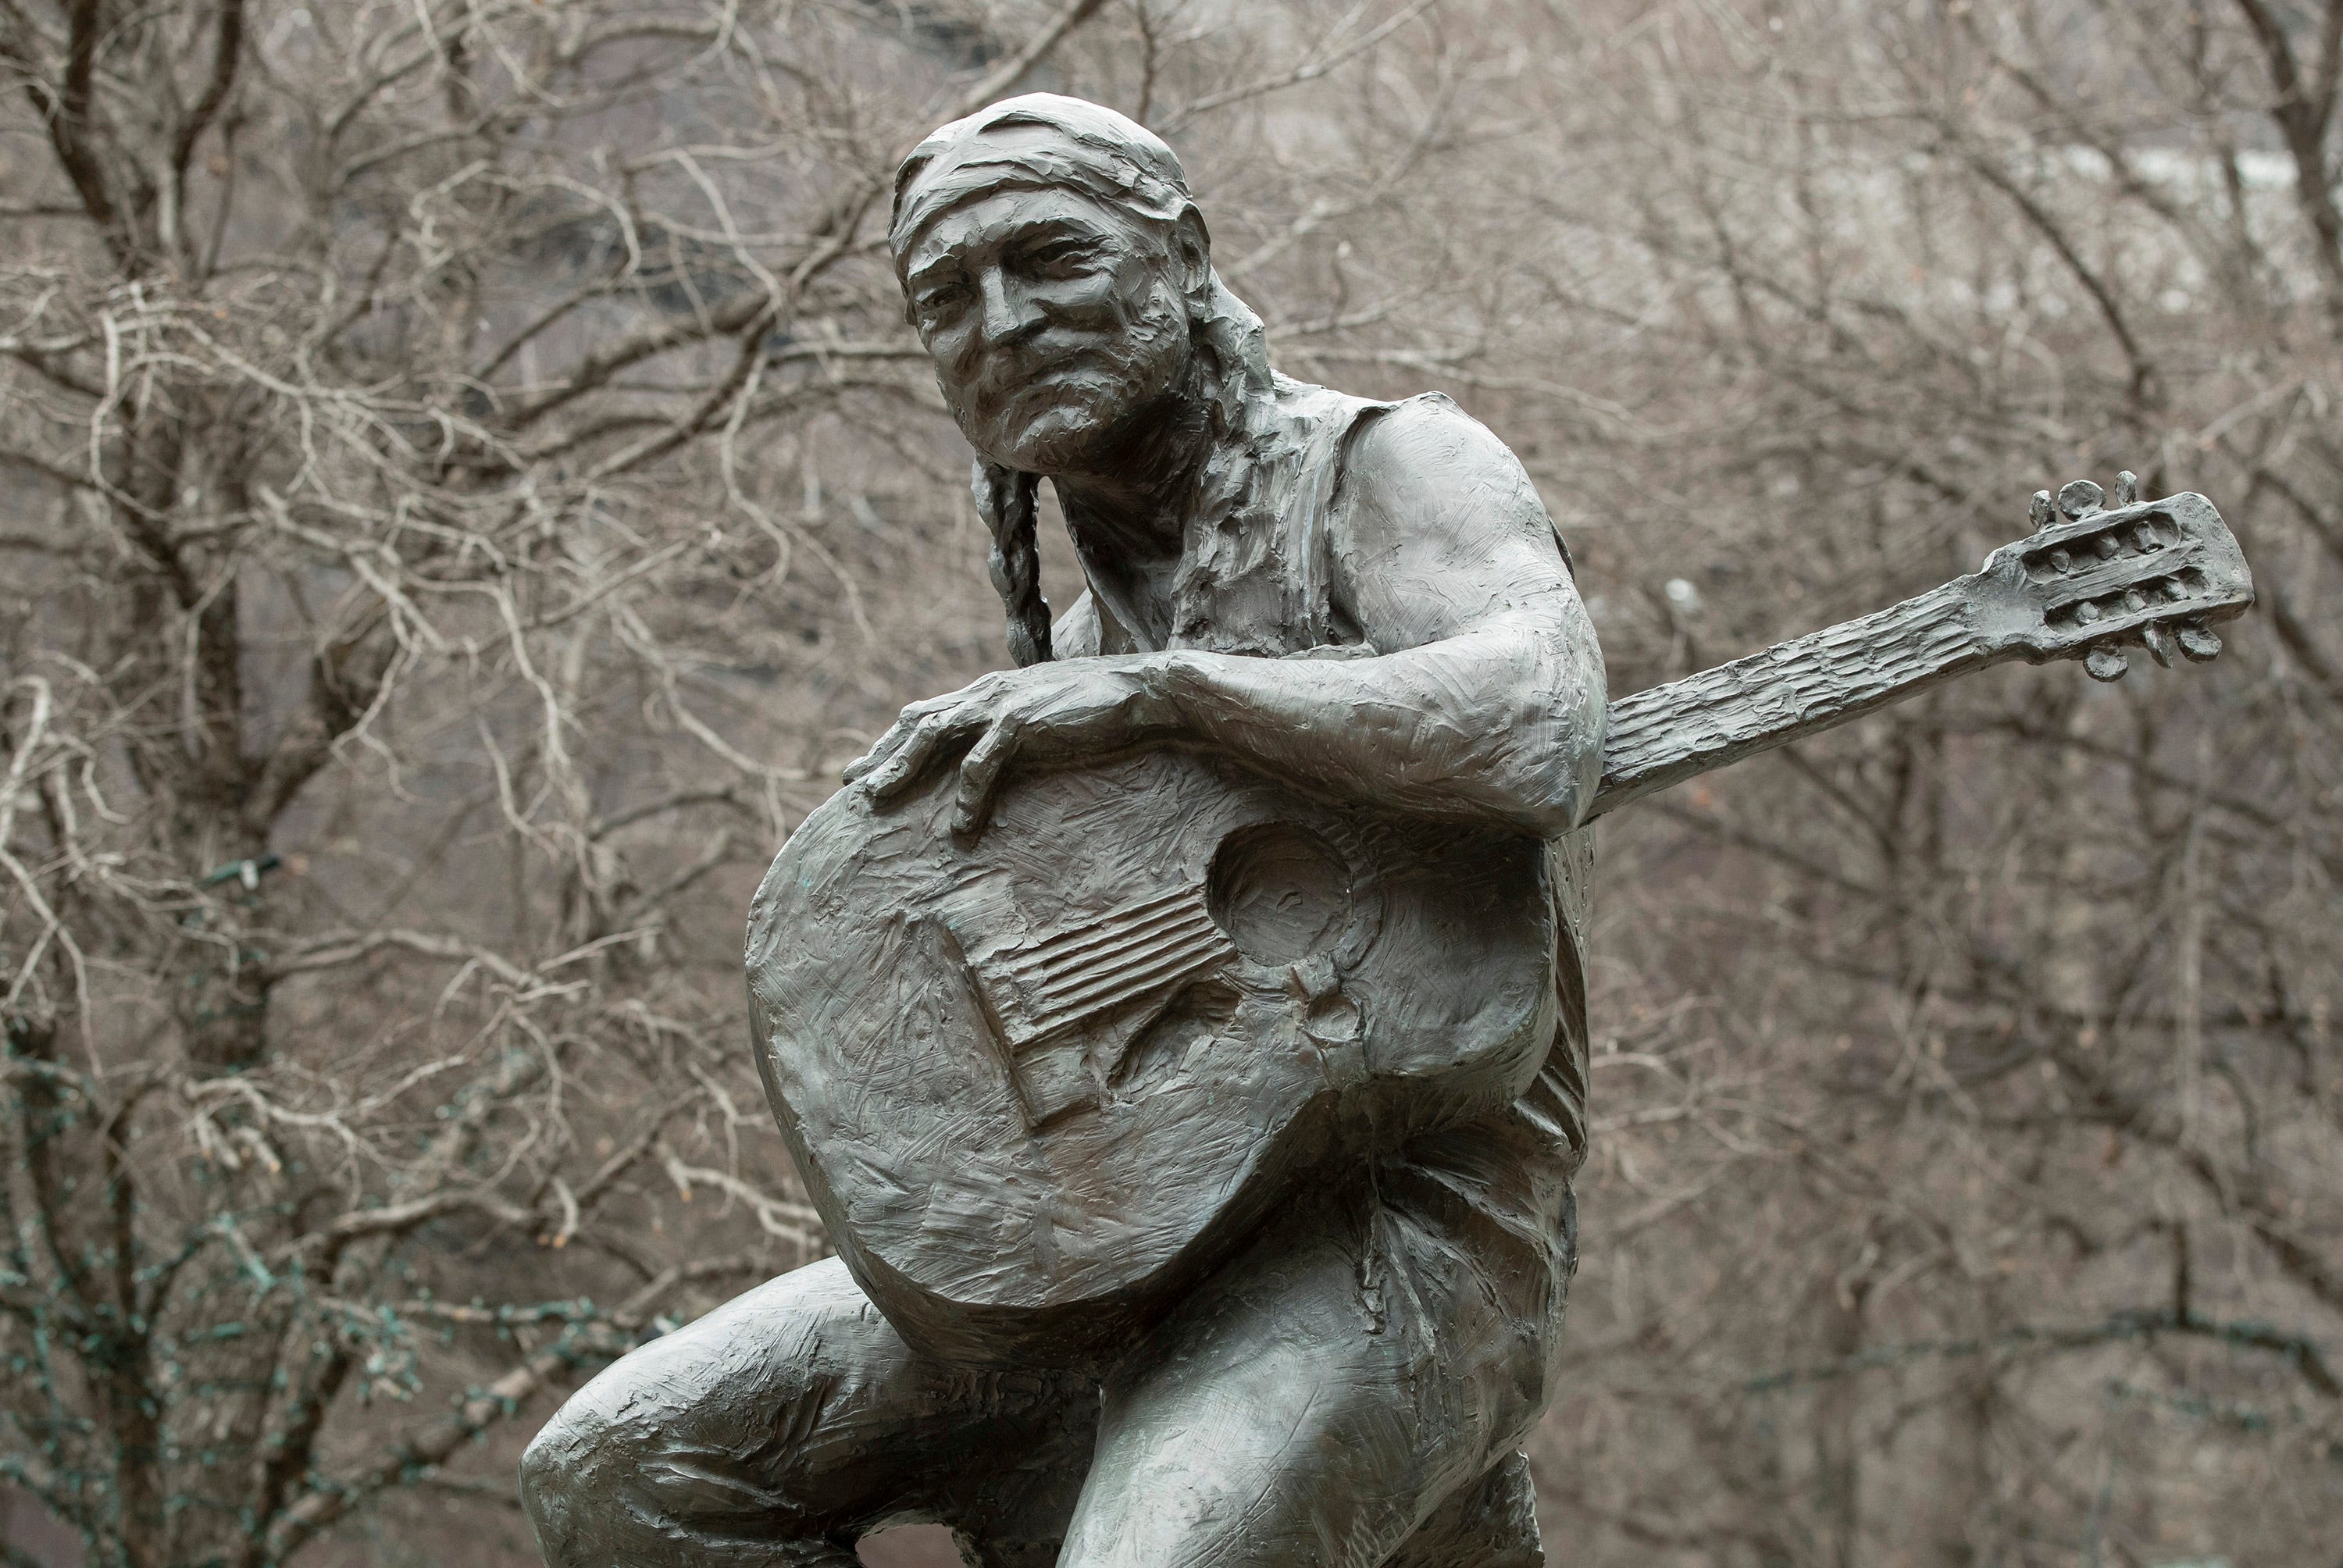 The Willie Nelson statue in downtown Austin on Wednesday February 24, 2021.